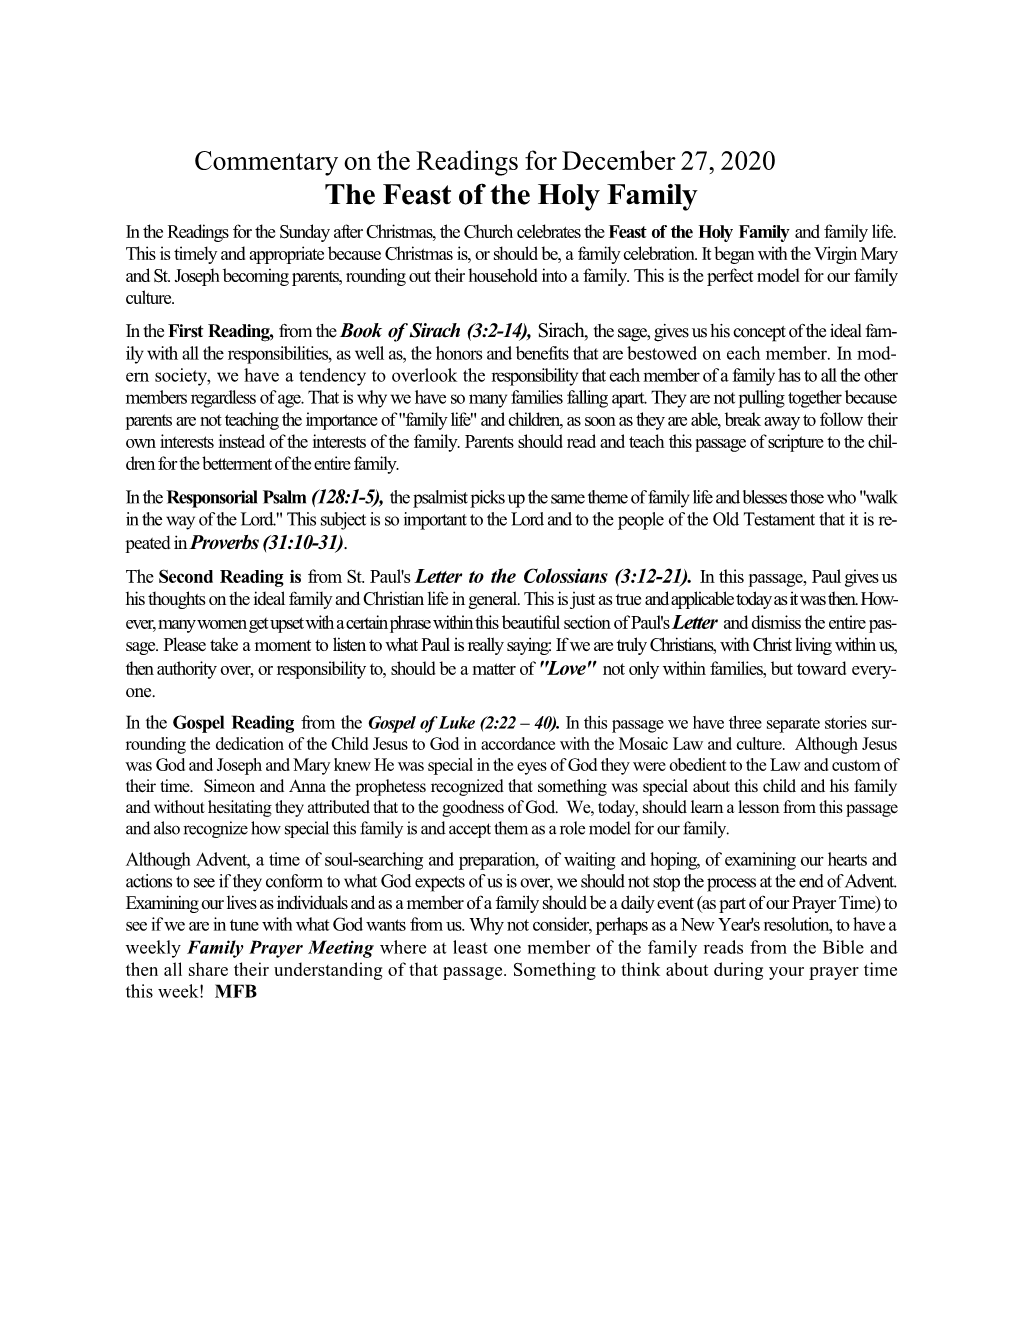 The Feast of the Holy Family in the Readings for the Sunday After Christmas, the Church Celebrates the Feast of the Holy Family and Family Life